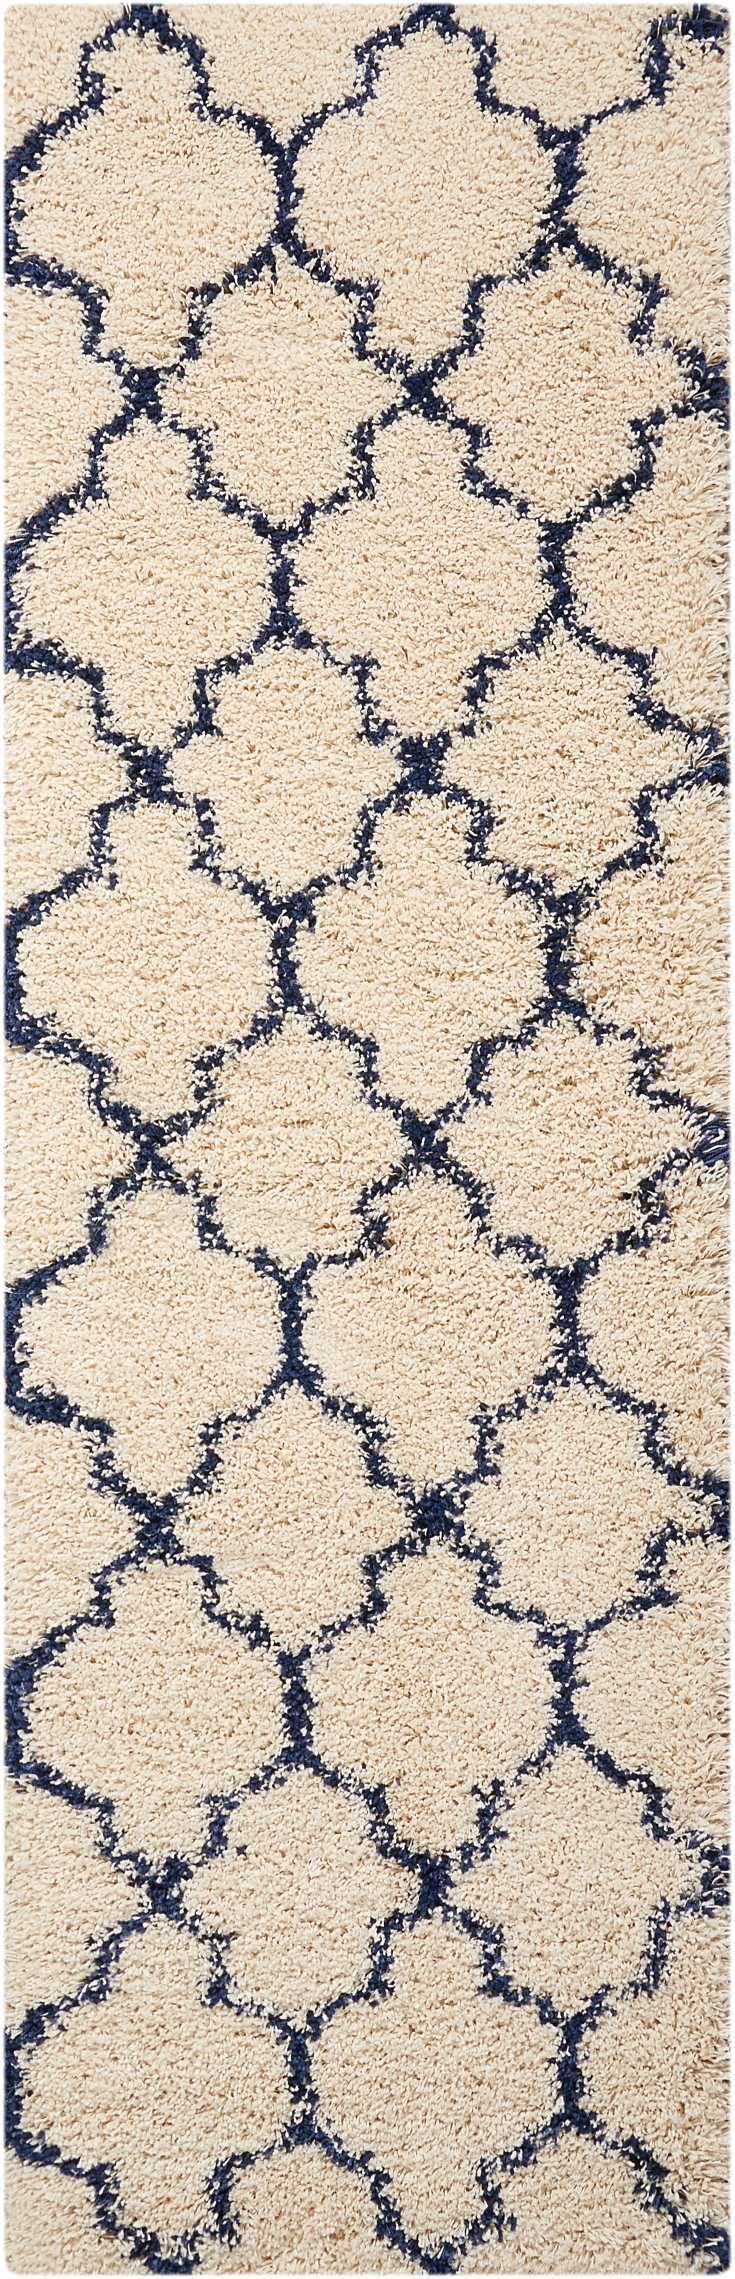 Runner Nourison Shag Rugs Amore Collection By Nourison Amor2 Ivory-Blue Unique Shapes and Sizes